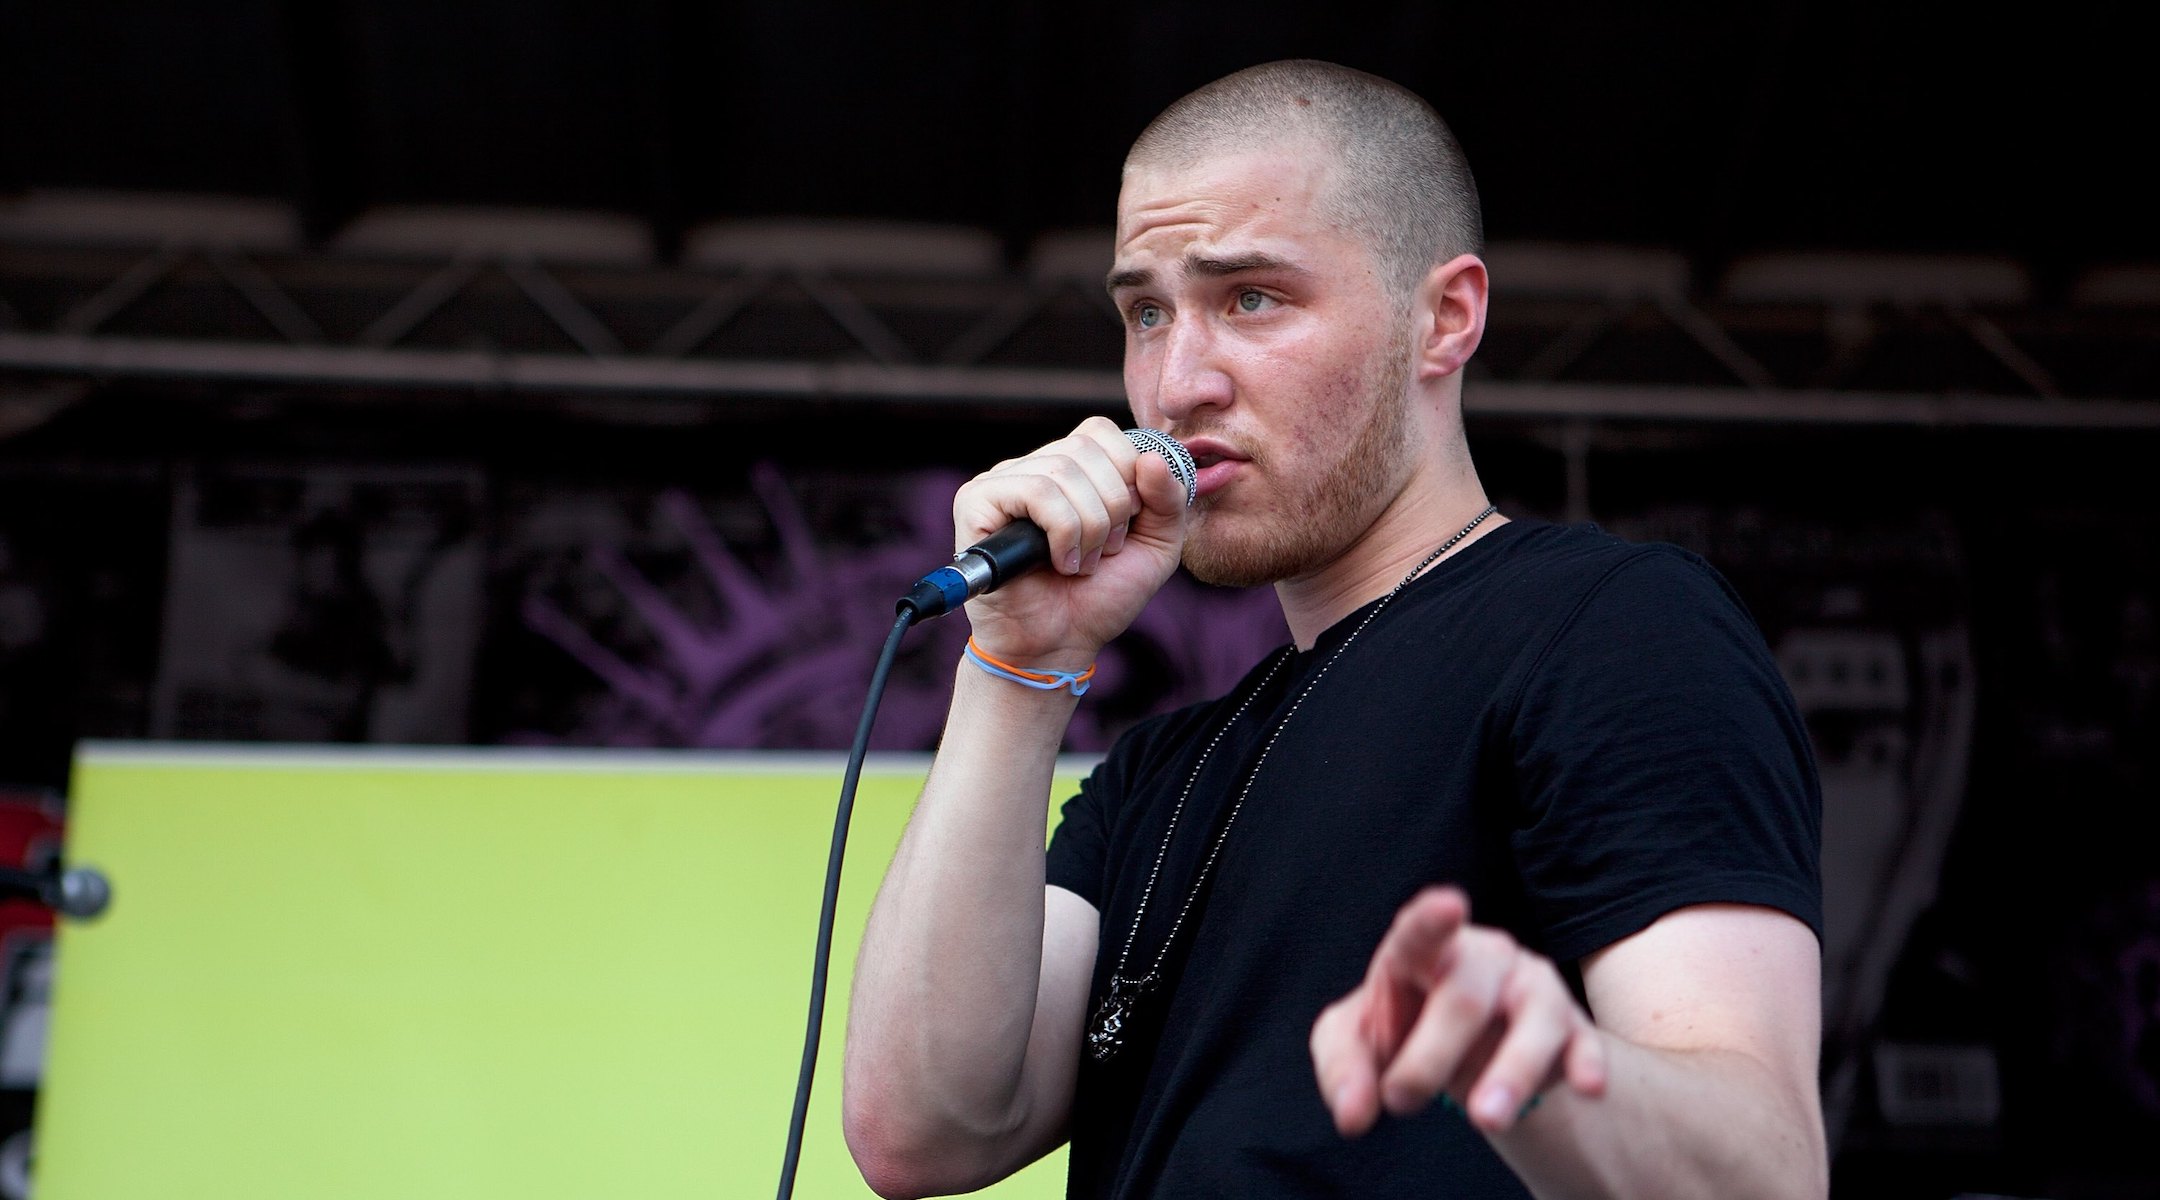 Mike Posner performs